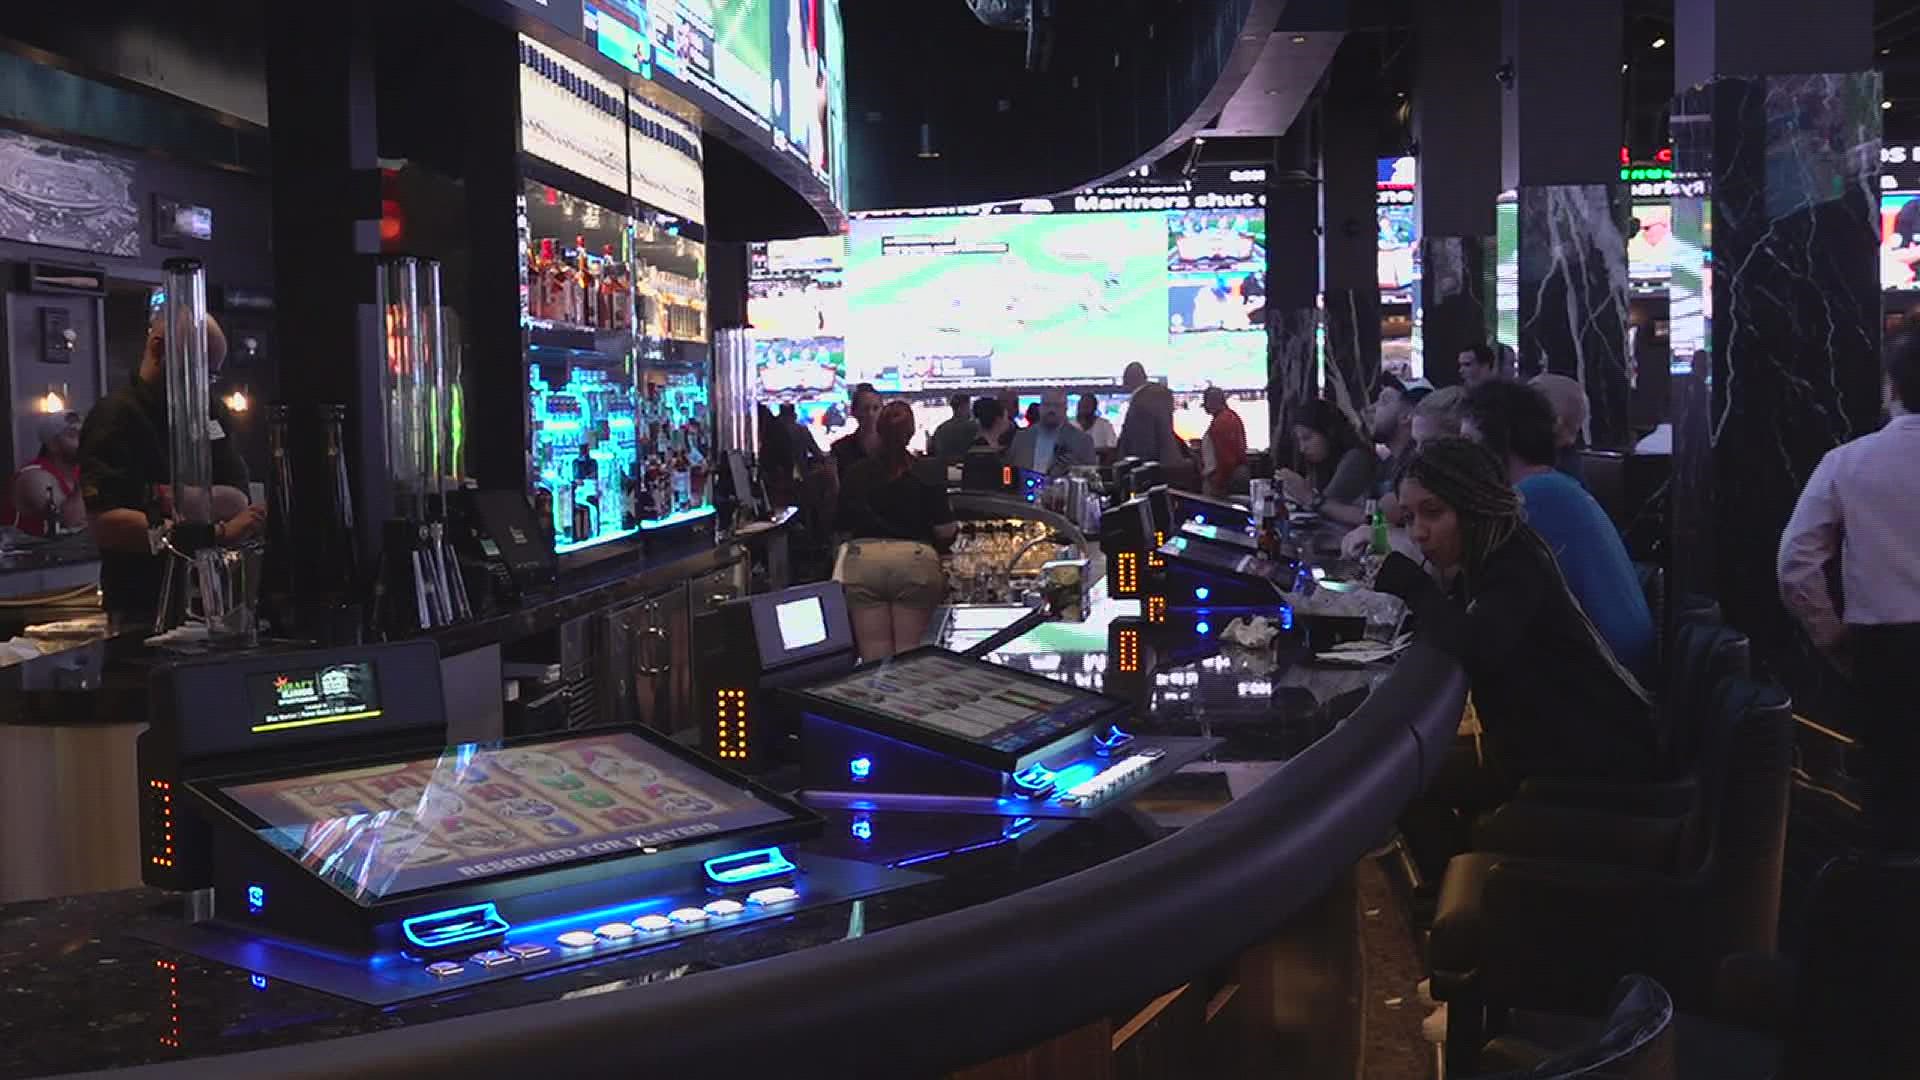 What is now the largest retail sportsbook in Louisiana officially opened for business Thursday.